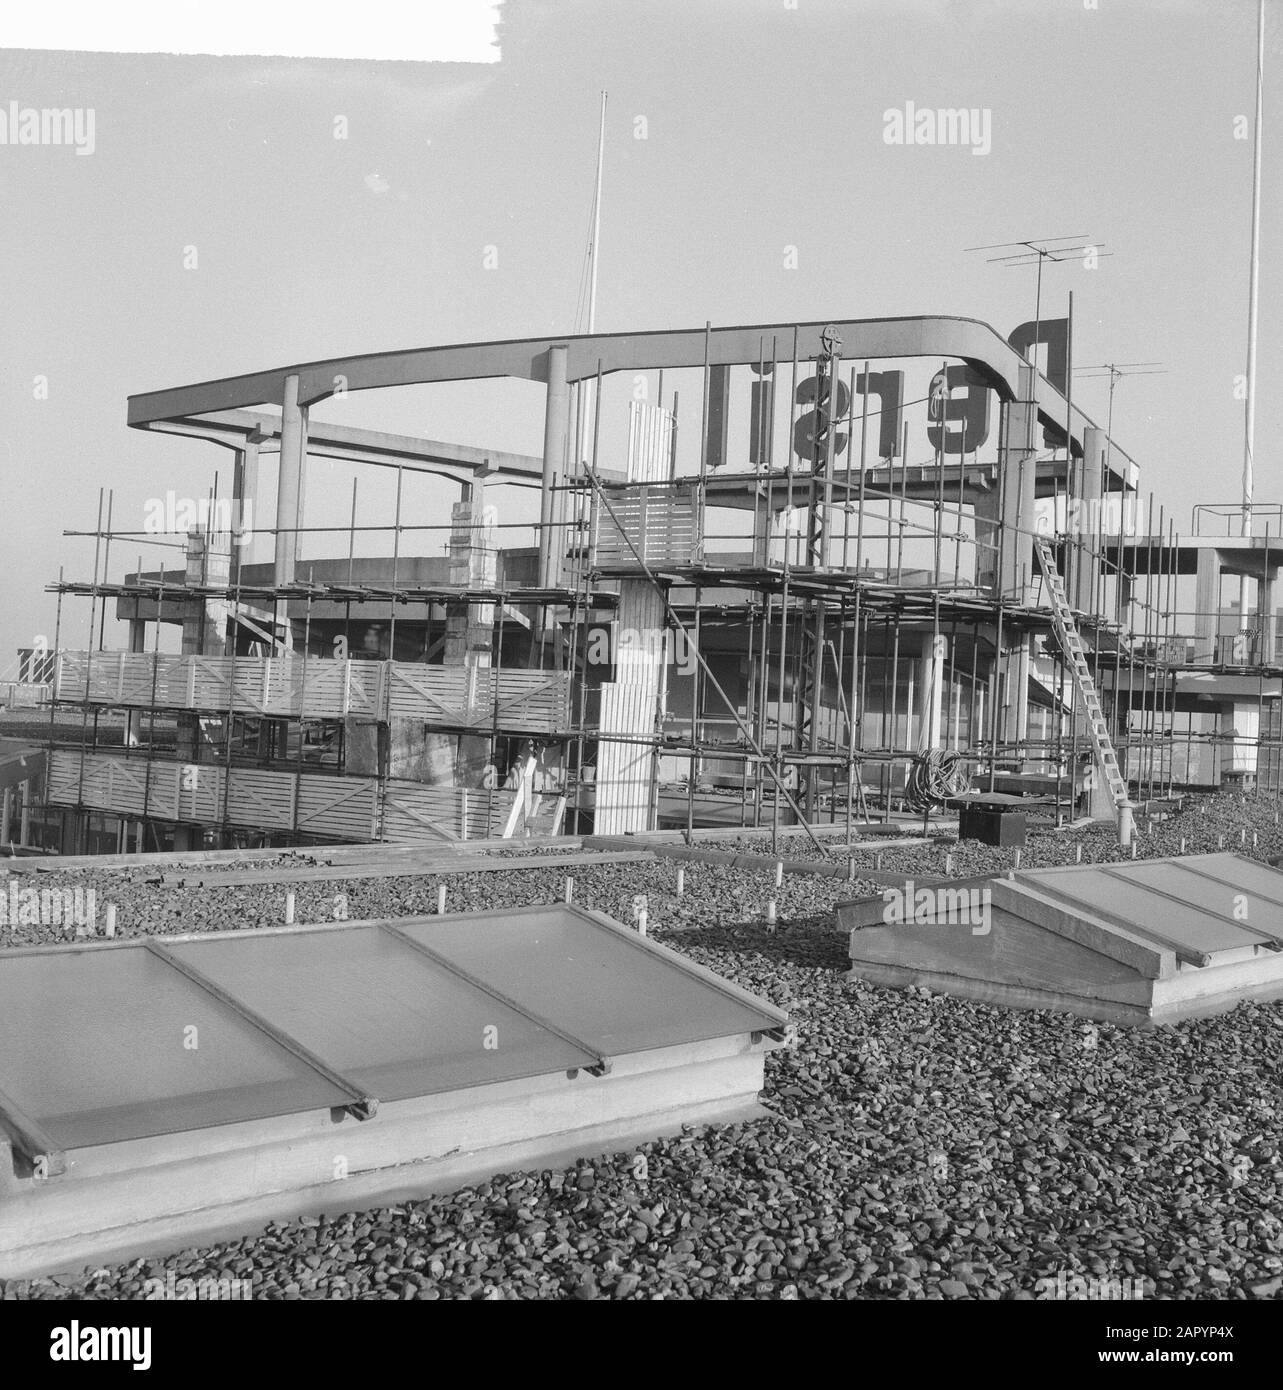 On the roof of the Groothandelsgebouw in Rotterdam a cinema is being built Annotation: The architects are Huig A. Maaskant and Willem van Tijen Datum: January 3, 1961 Location: Rotterdam, Zuid- Holland Keywords: cinemas, wholesale buildings Stock Photo